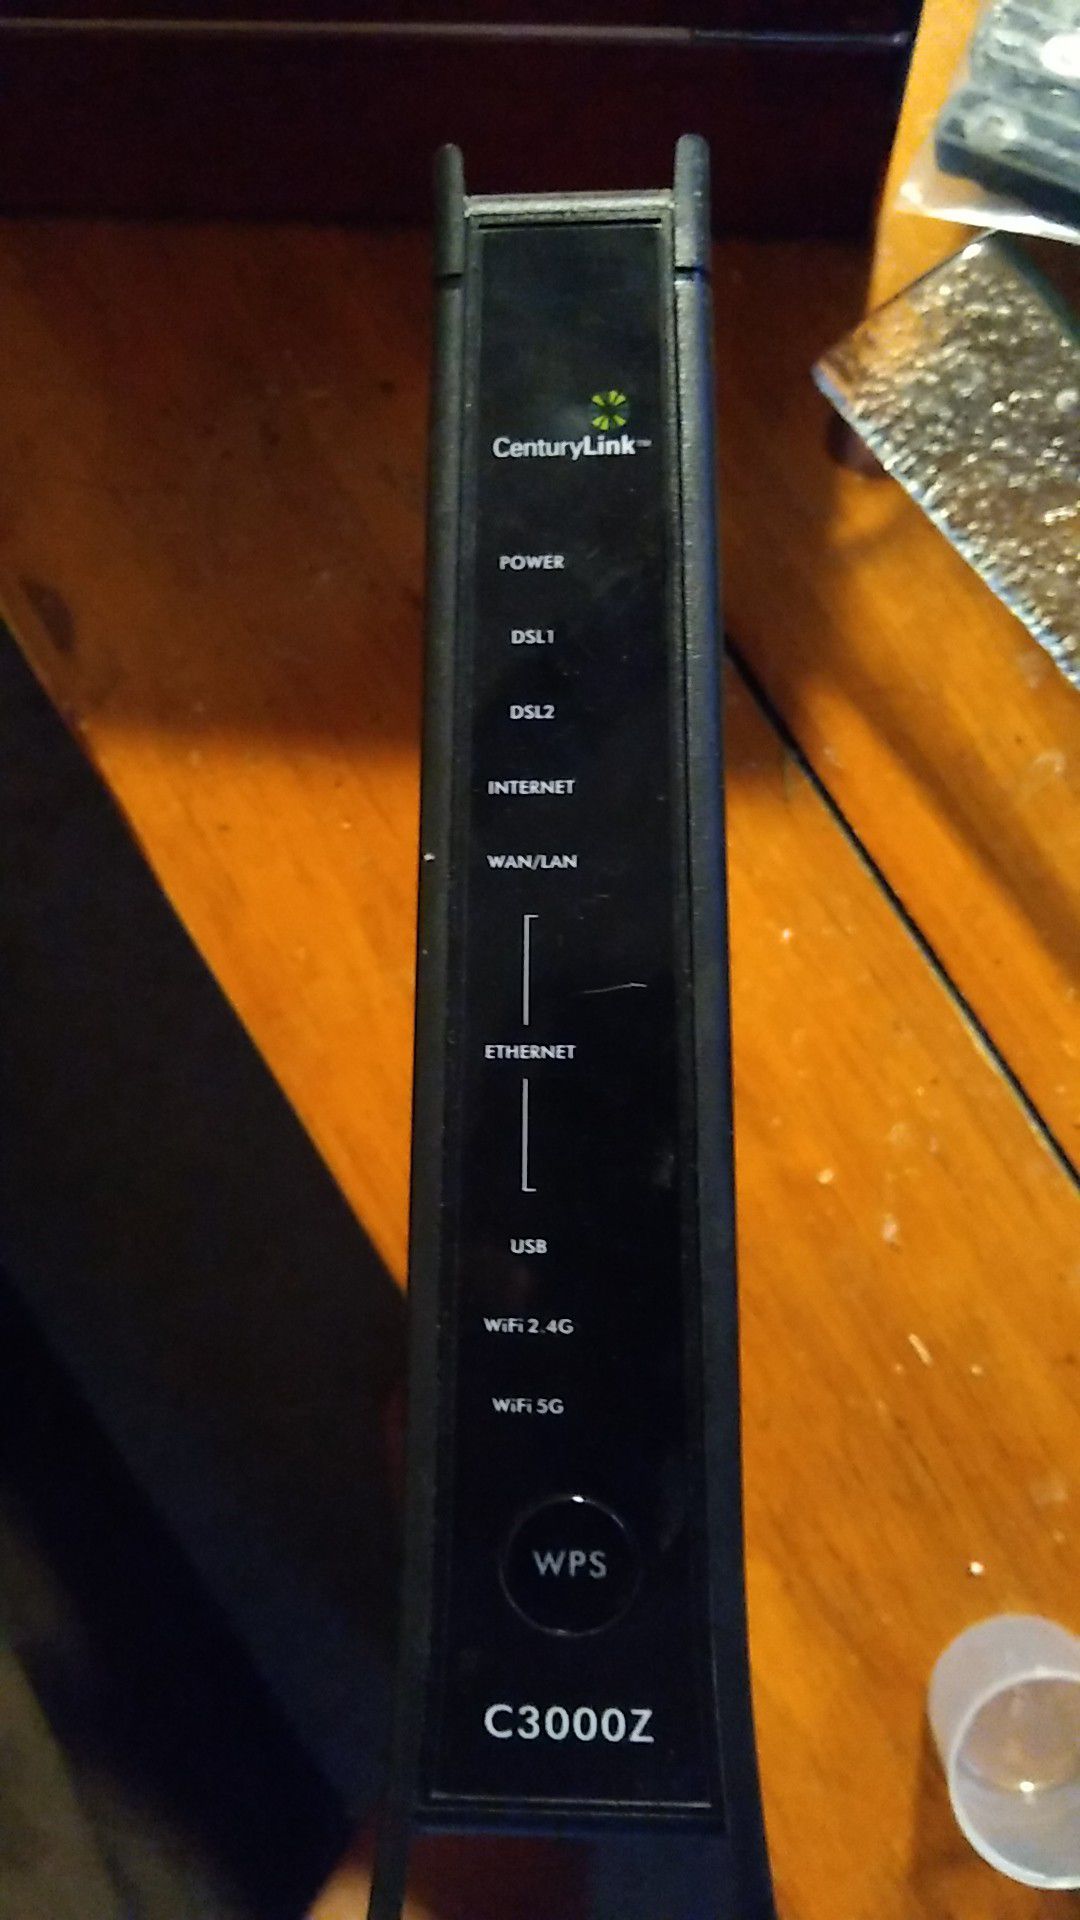 CenturyLink wireless router and modem combo model c3000z